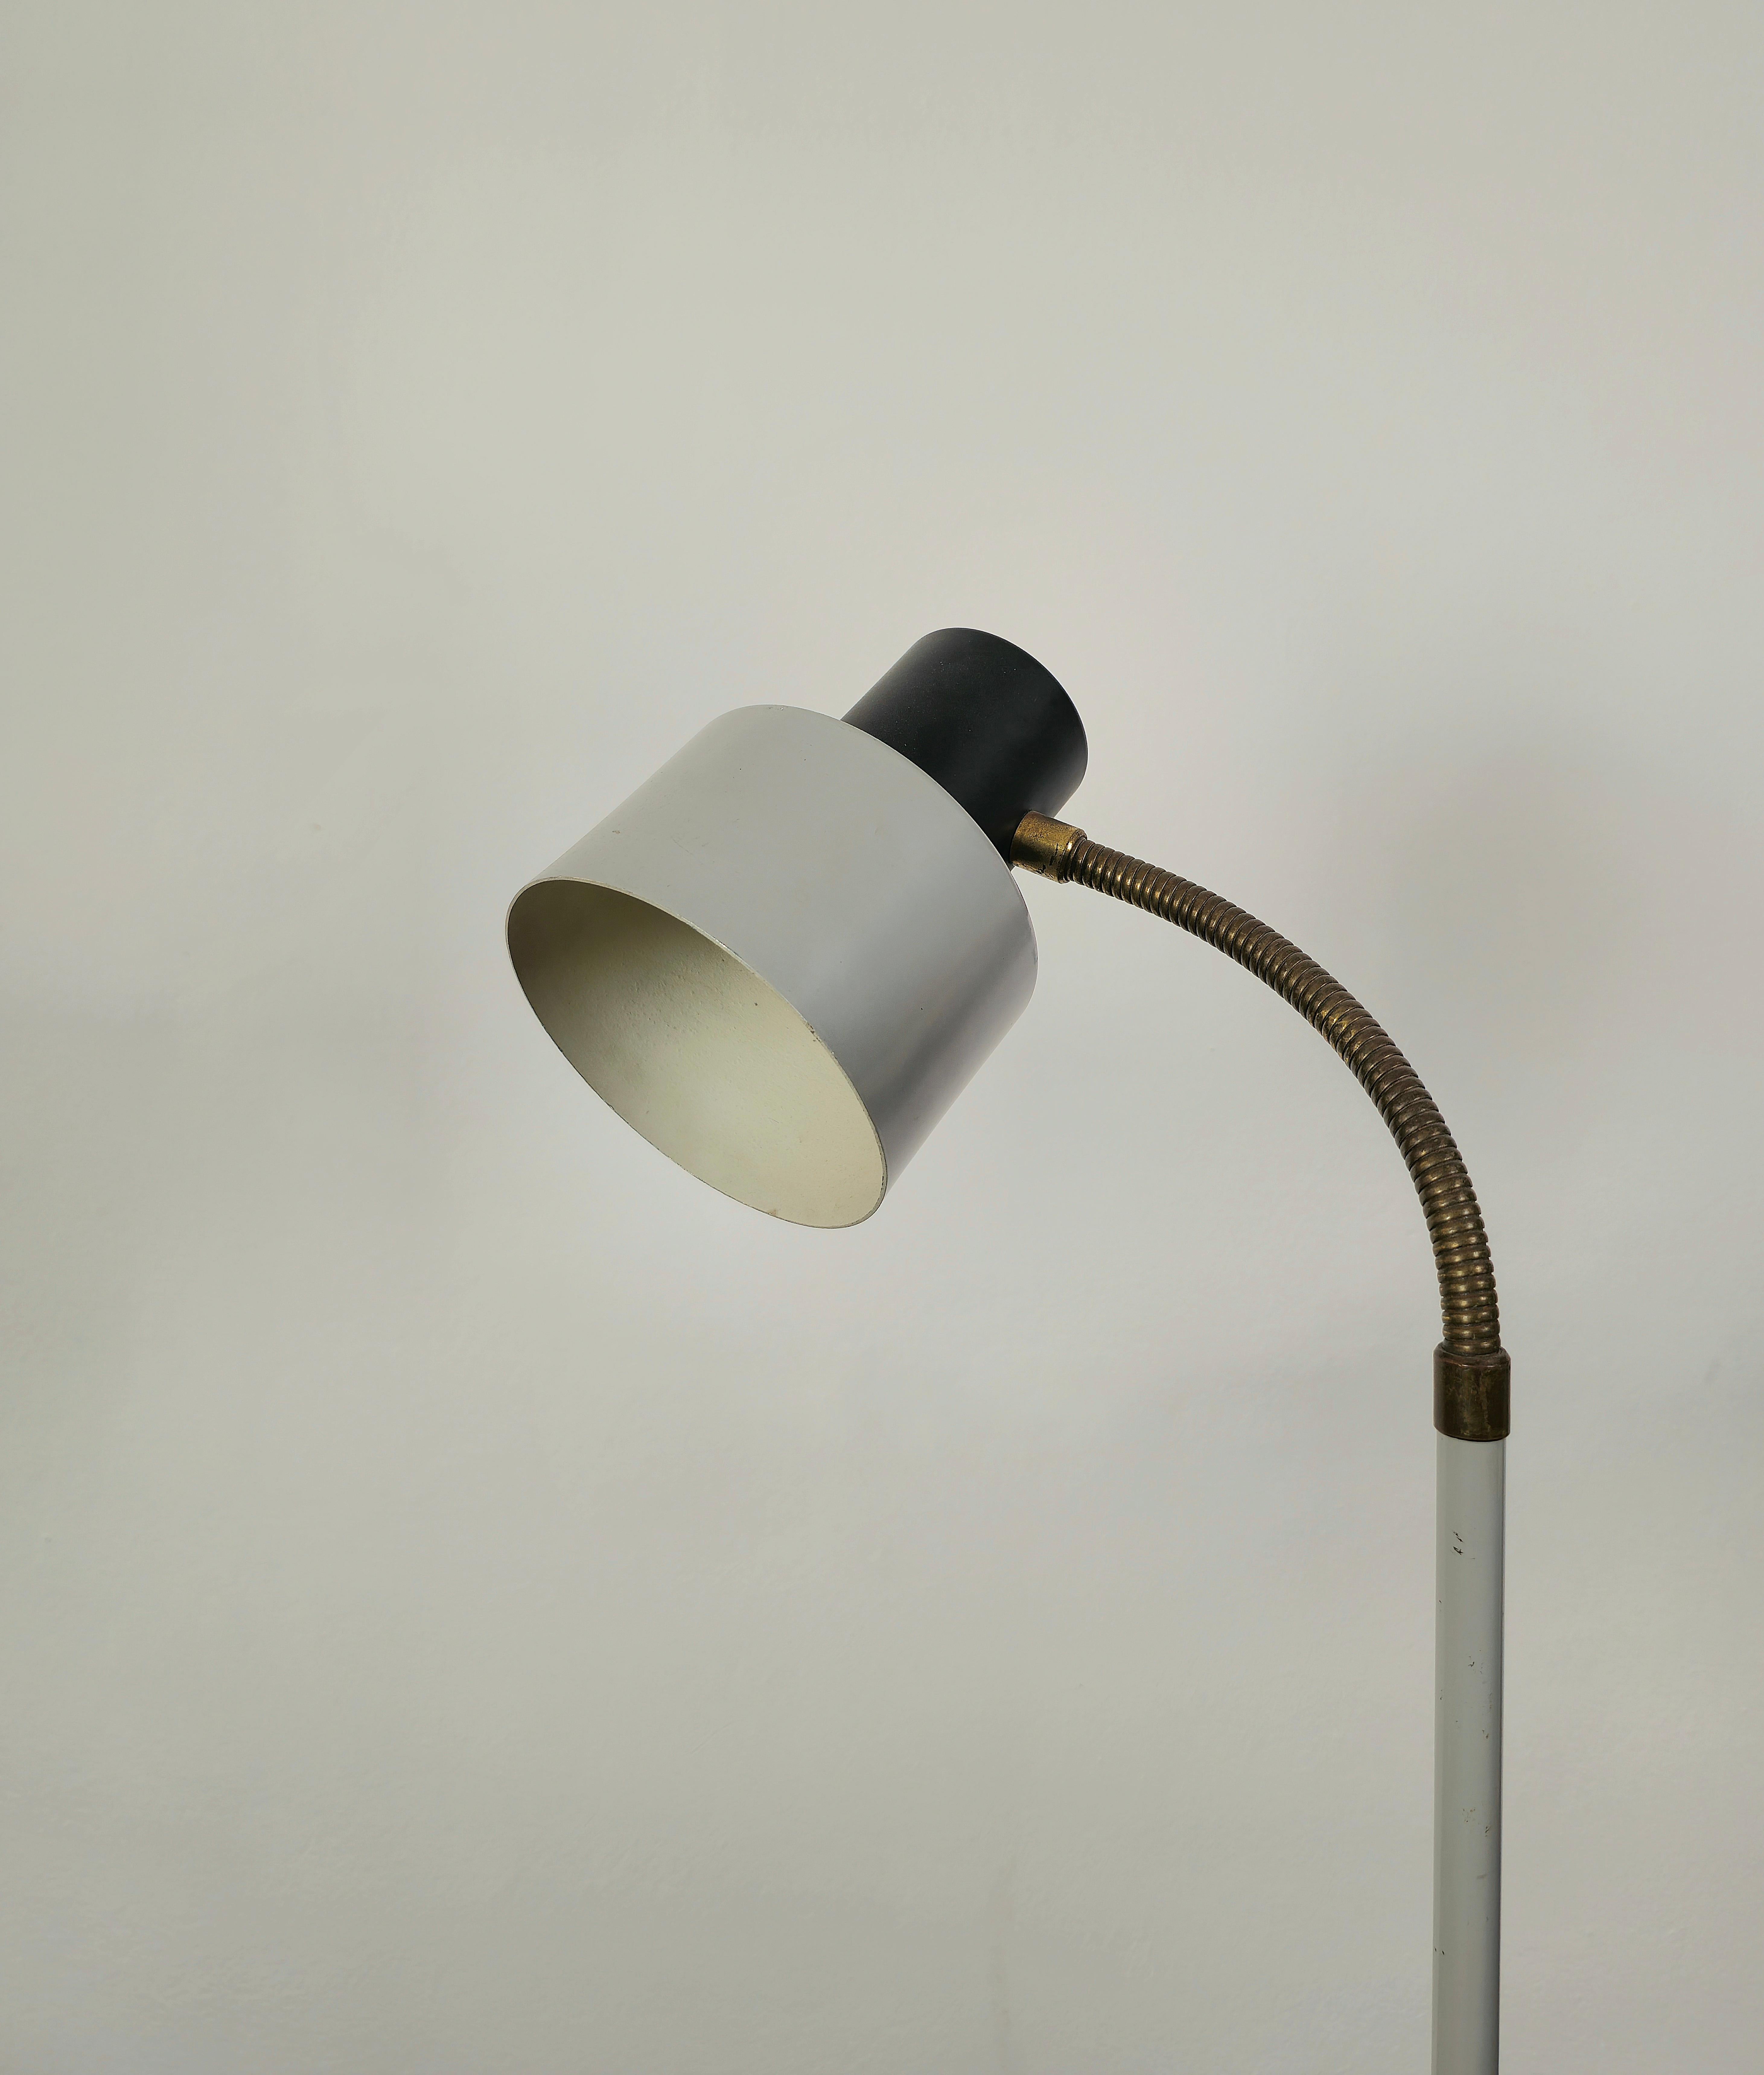 20th Century Floor Lamp Attributed to Stilux Aluminum Brass Marble Midcentury, Italy, 1950s For Sale